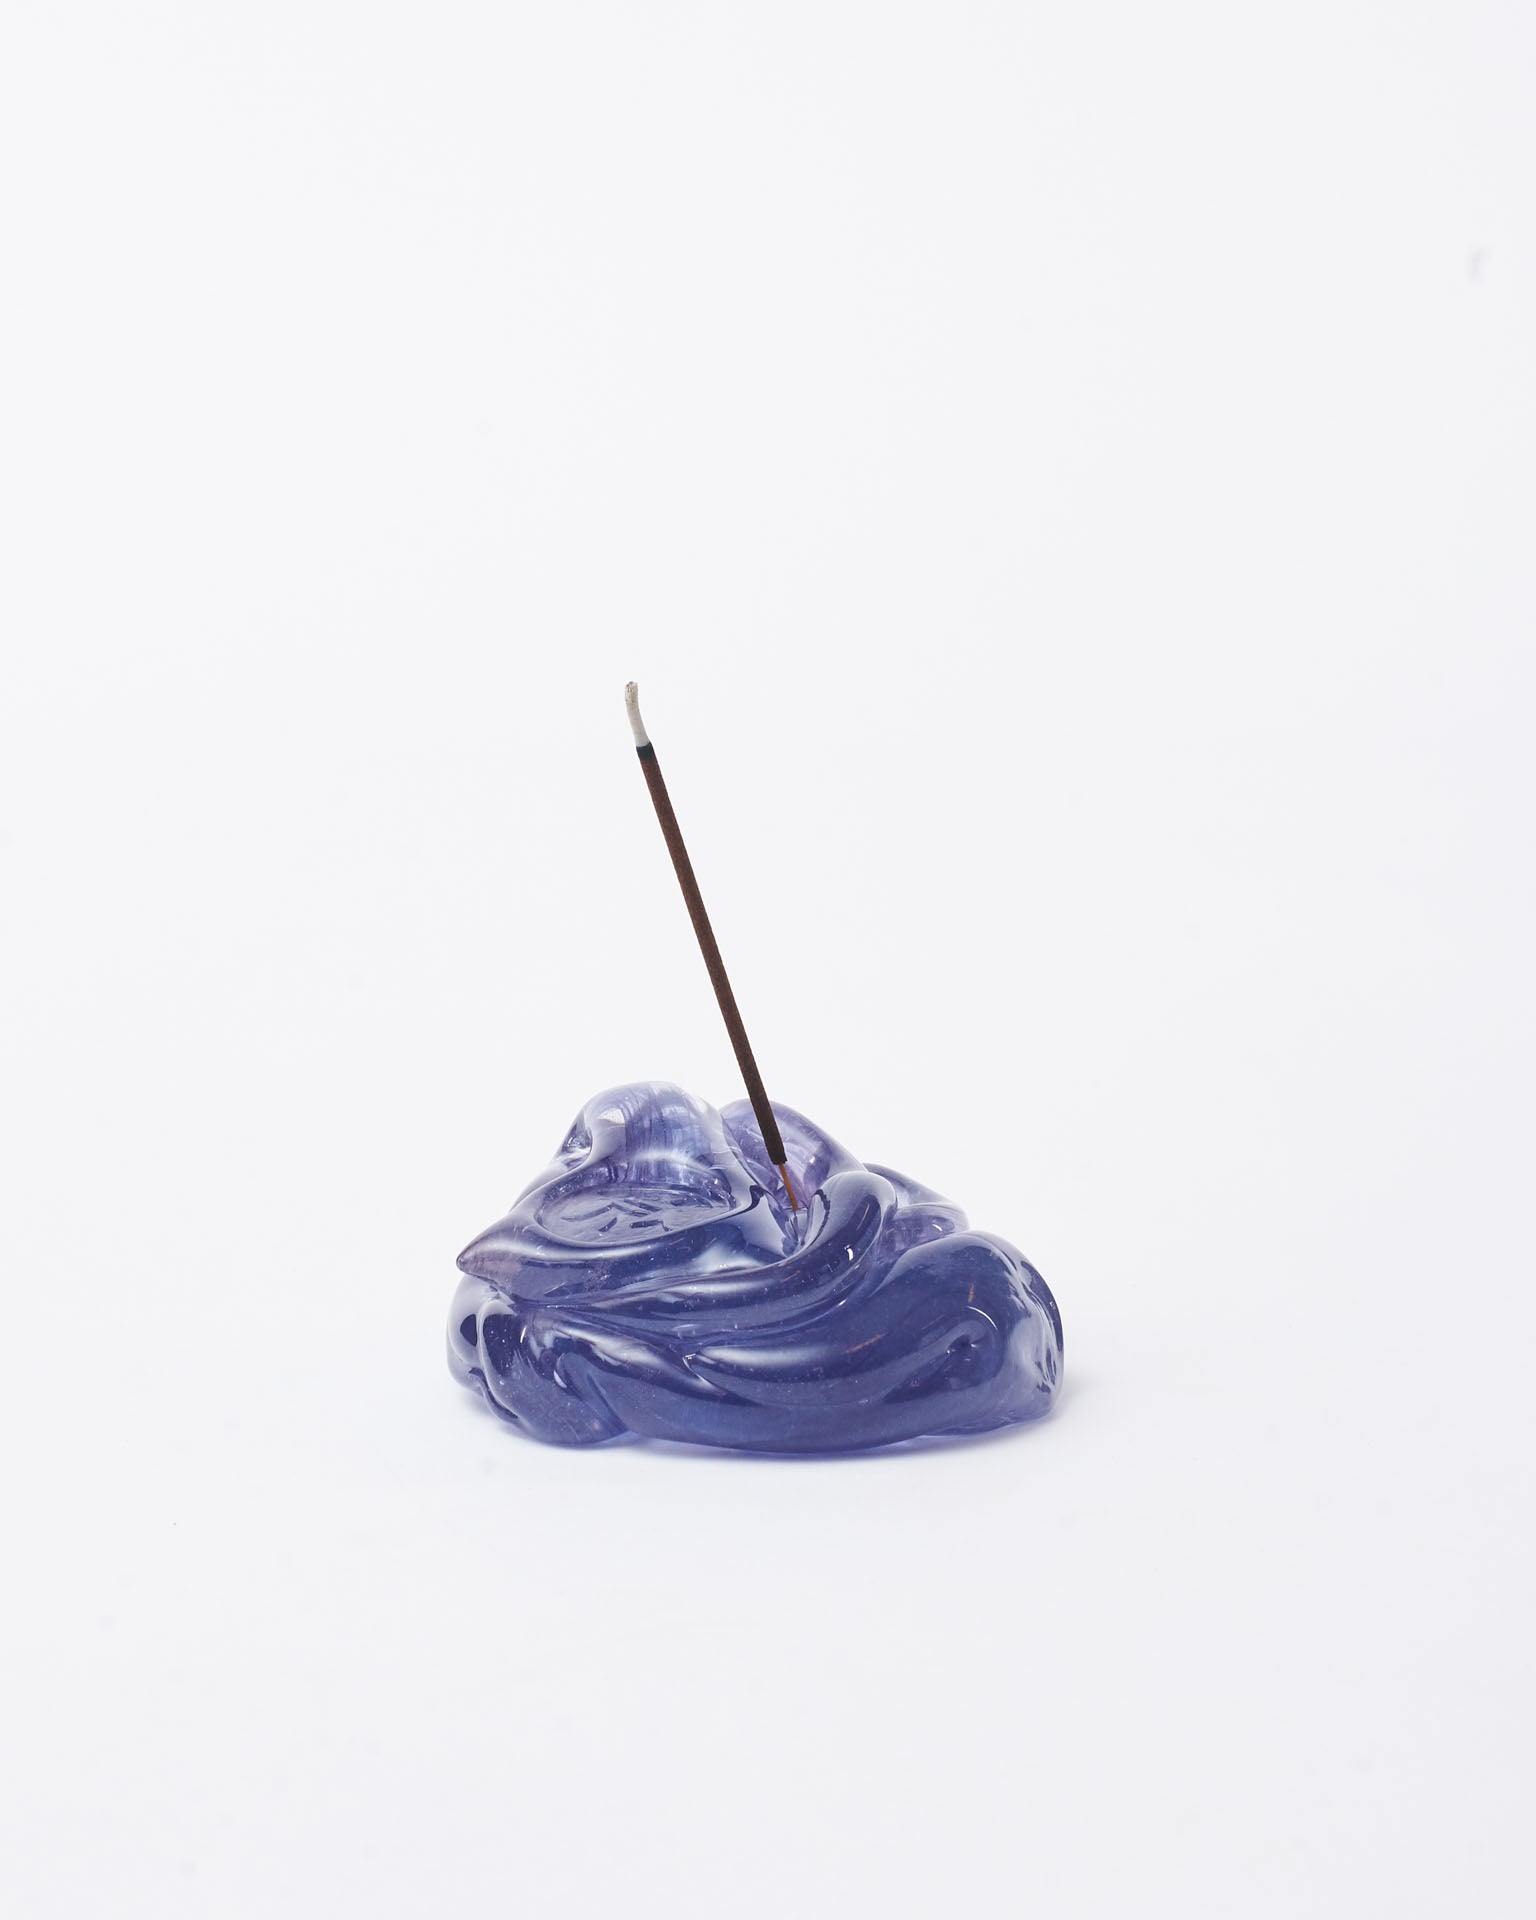 Handmade glass incense holder purple with an incense in white background